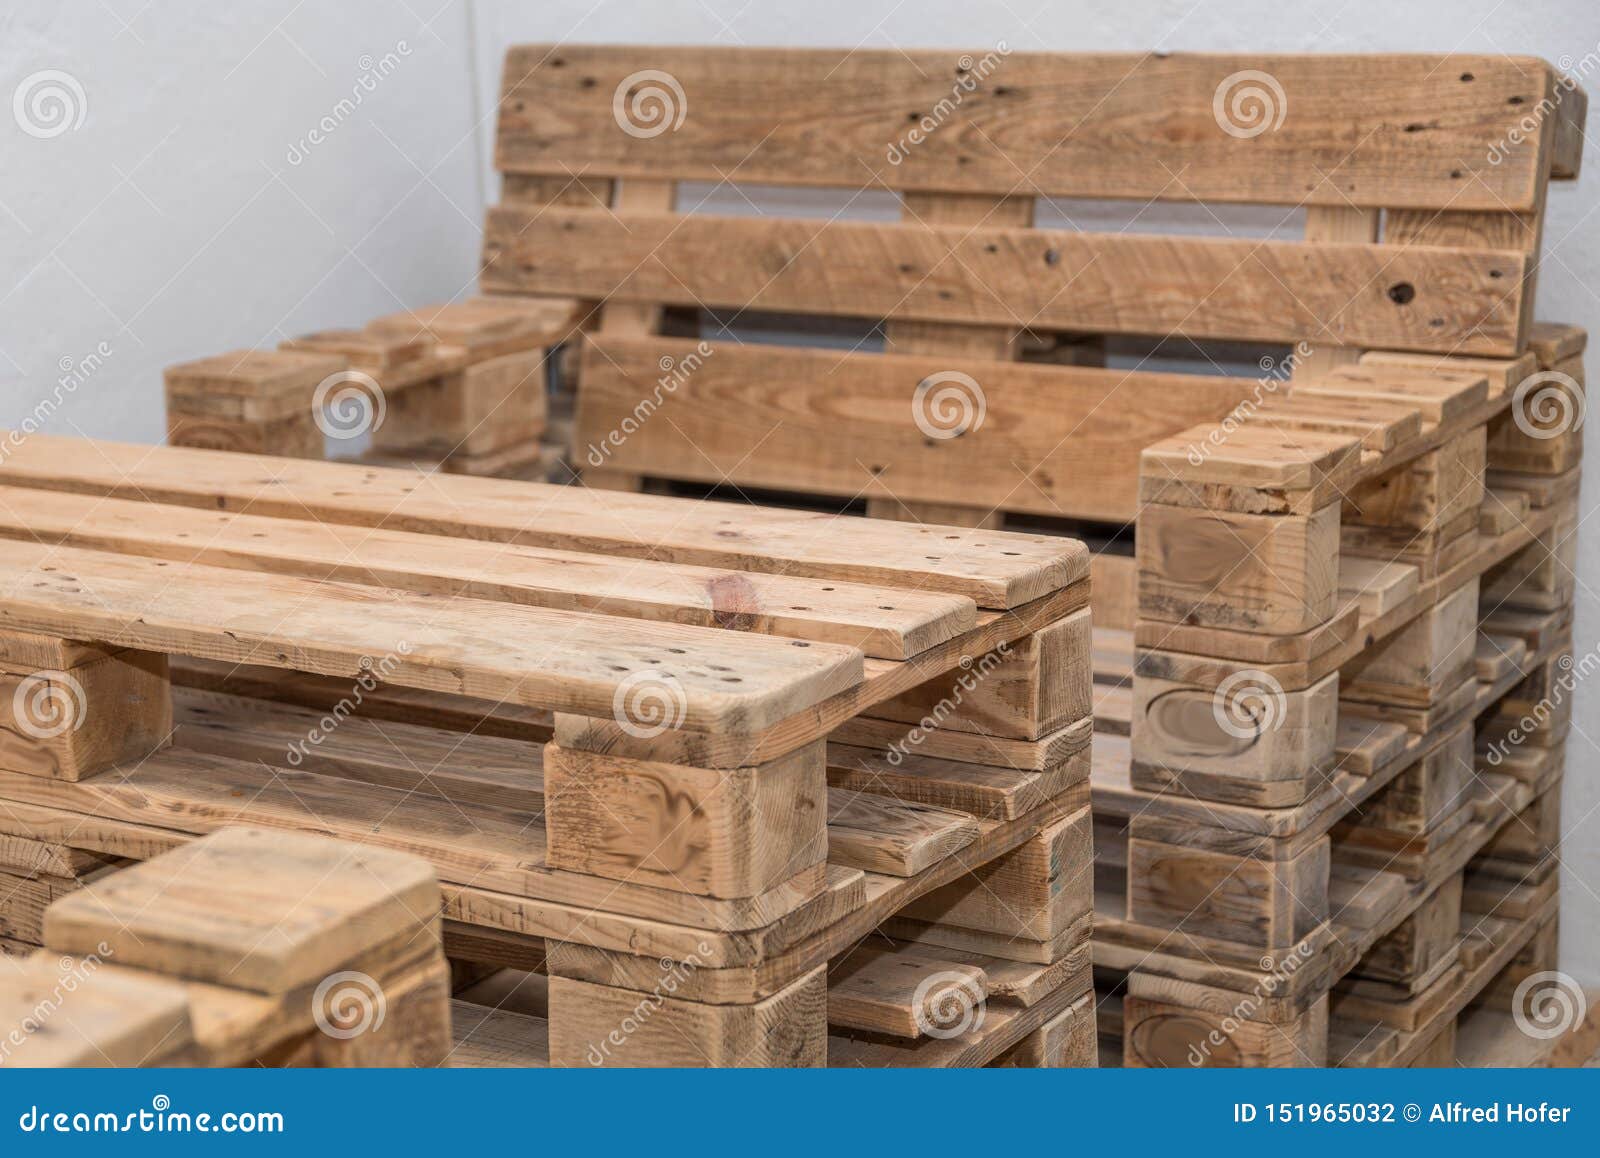 Rustic Wooden Furniture Made Of Wooden Pallets Stock Photo Image